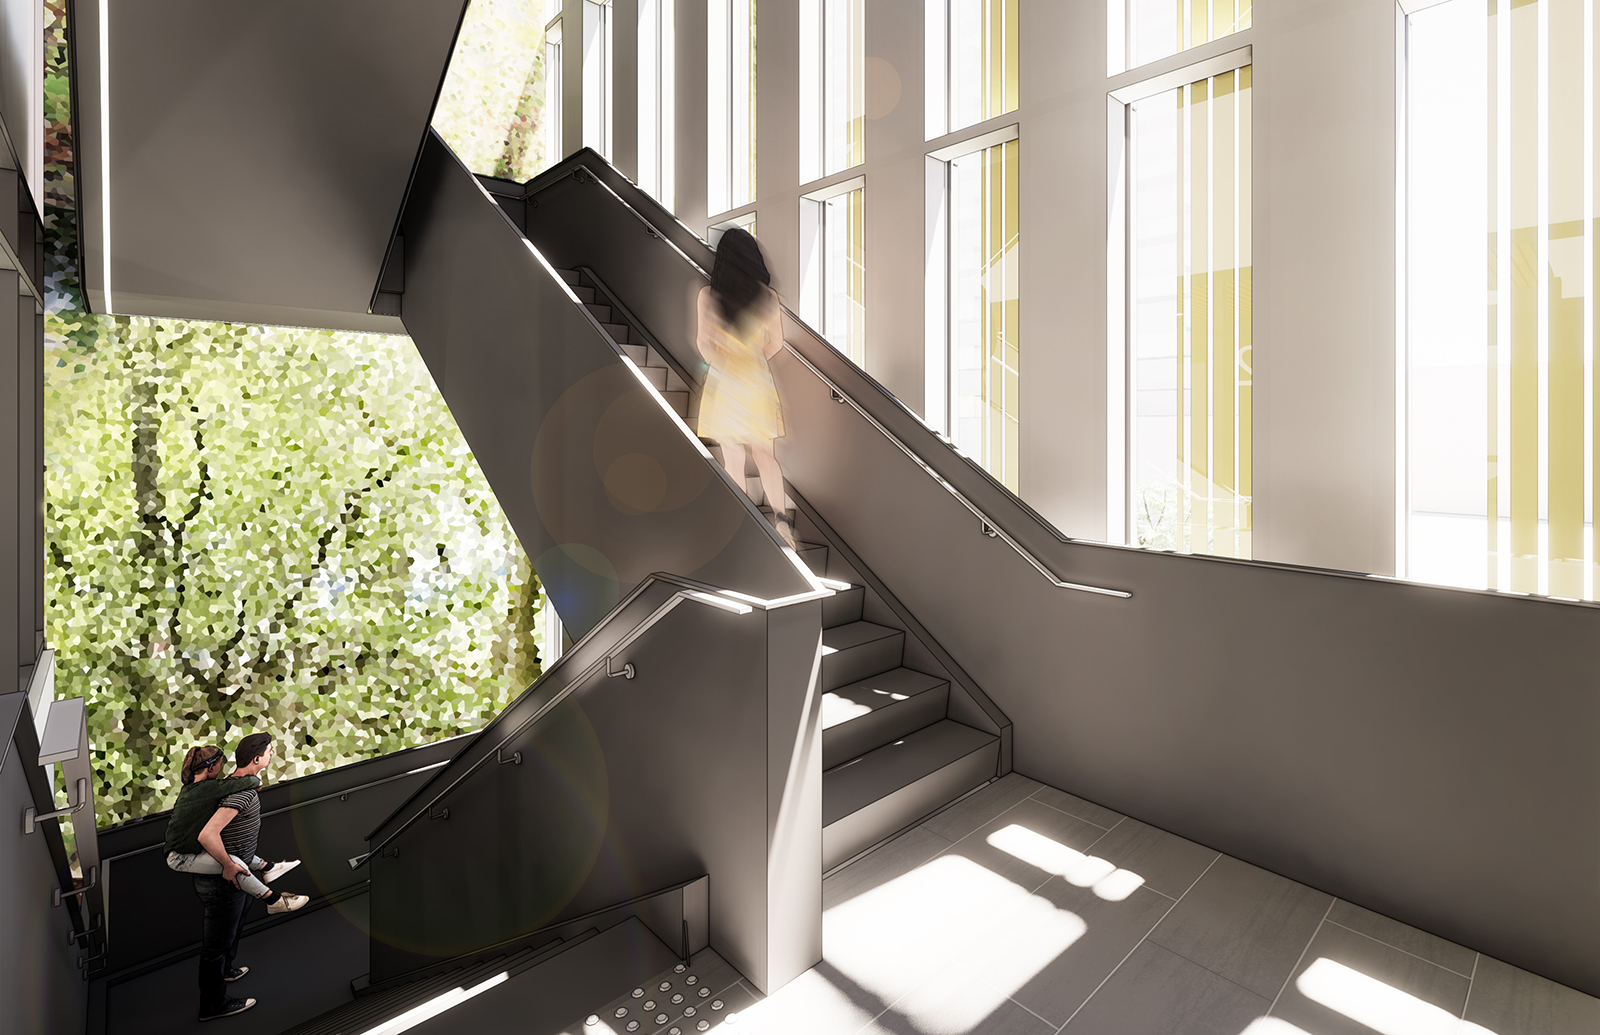 A rendering of the main staircase, located on the south end of the building. Windows surround the staircase facing south onto Davisville Ave and into the lobby spaces of the new Centre. Three people are using the staircase in this image.